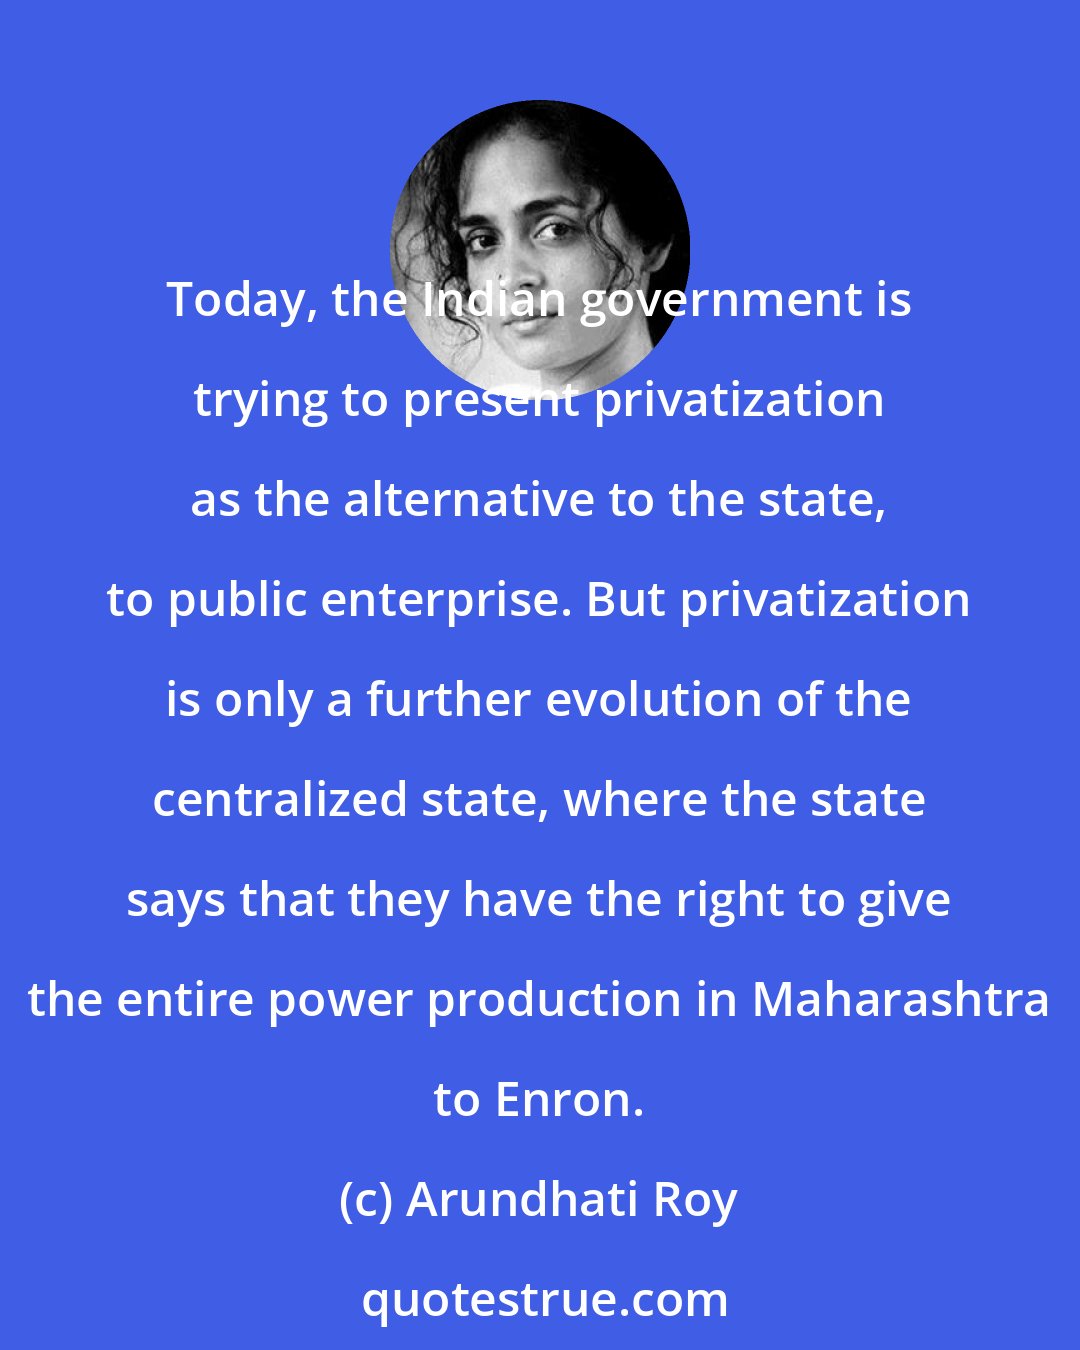 Arundhati Roy: Today, the Indian government is trying to present privatization as the alternative to the state, to public enterprise. But privatization is only a further evolution of the centralized state, where the state says that they have the right to give the entire power production in Maharashtra to Enron.